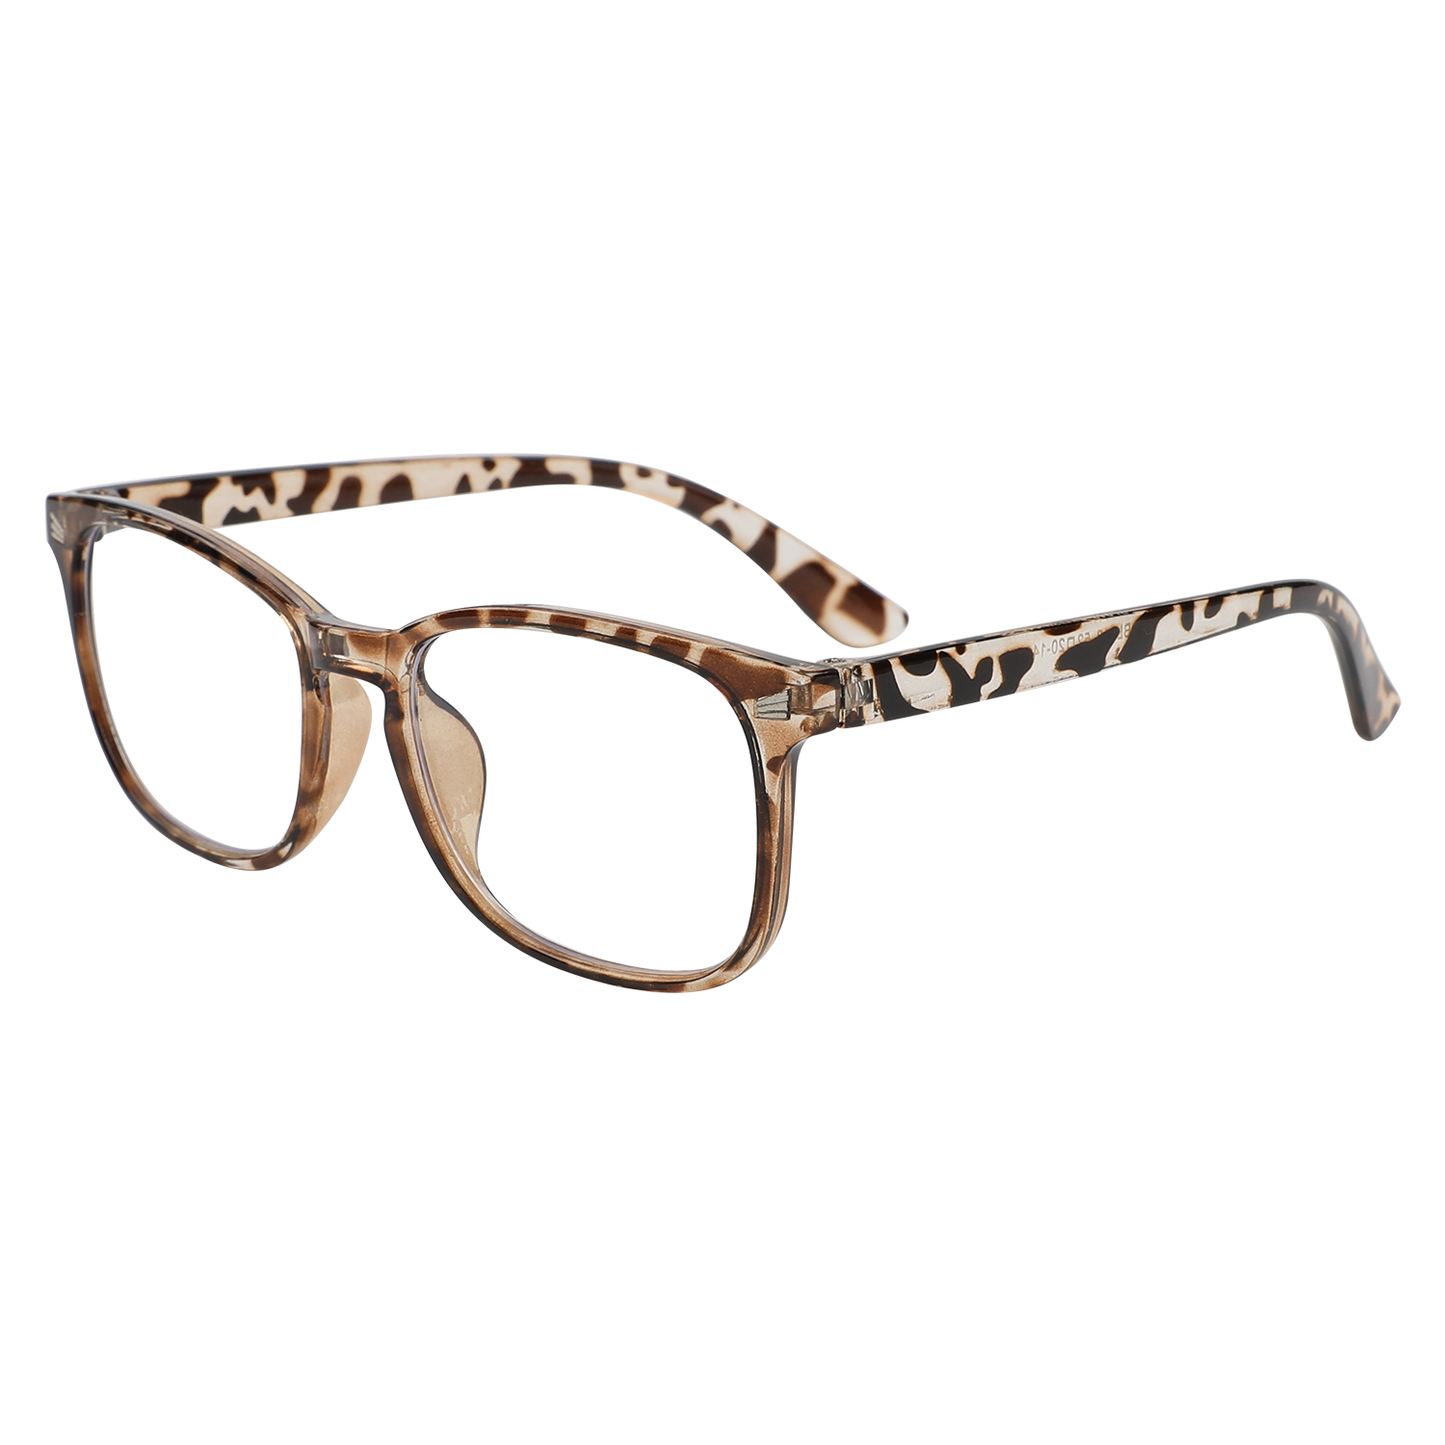 Reading Glasses with Blue Light Filter - Leopard 0.5x - 4.0x